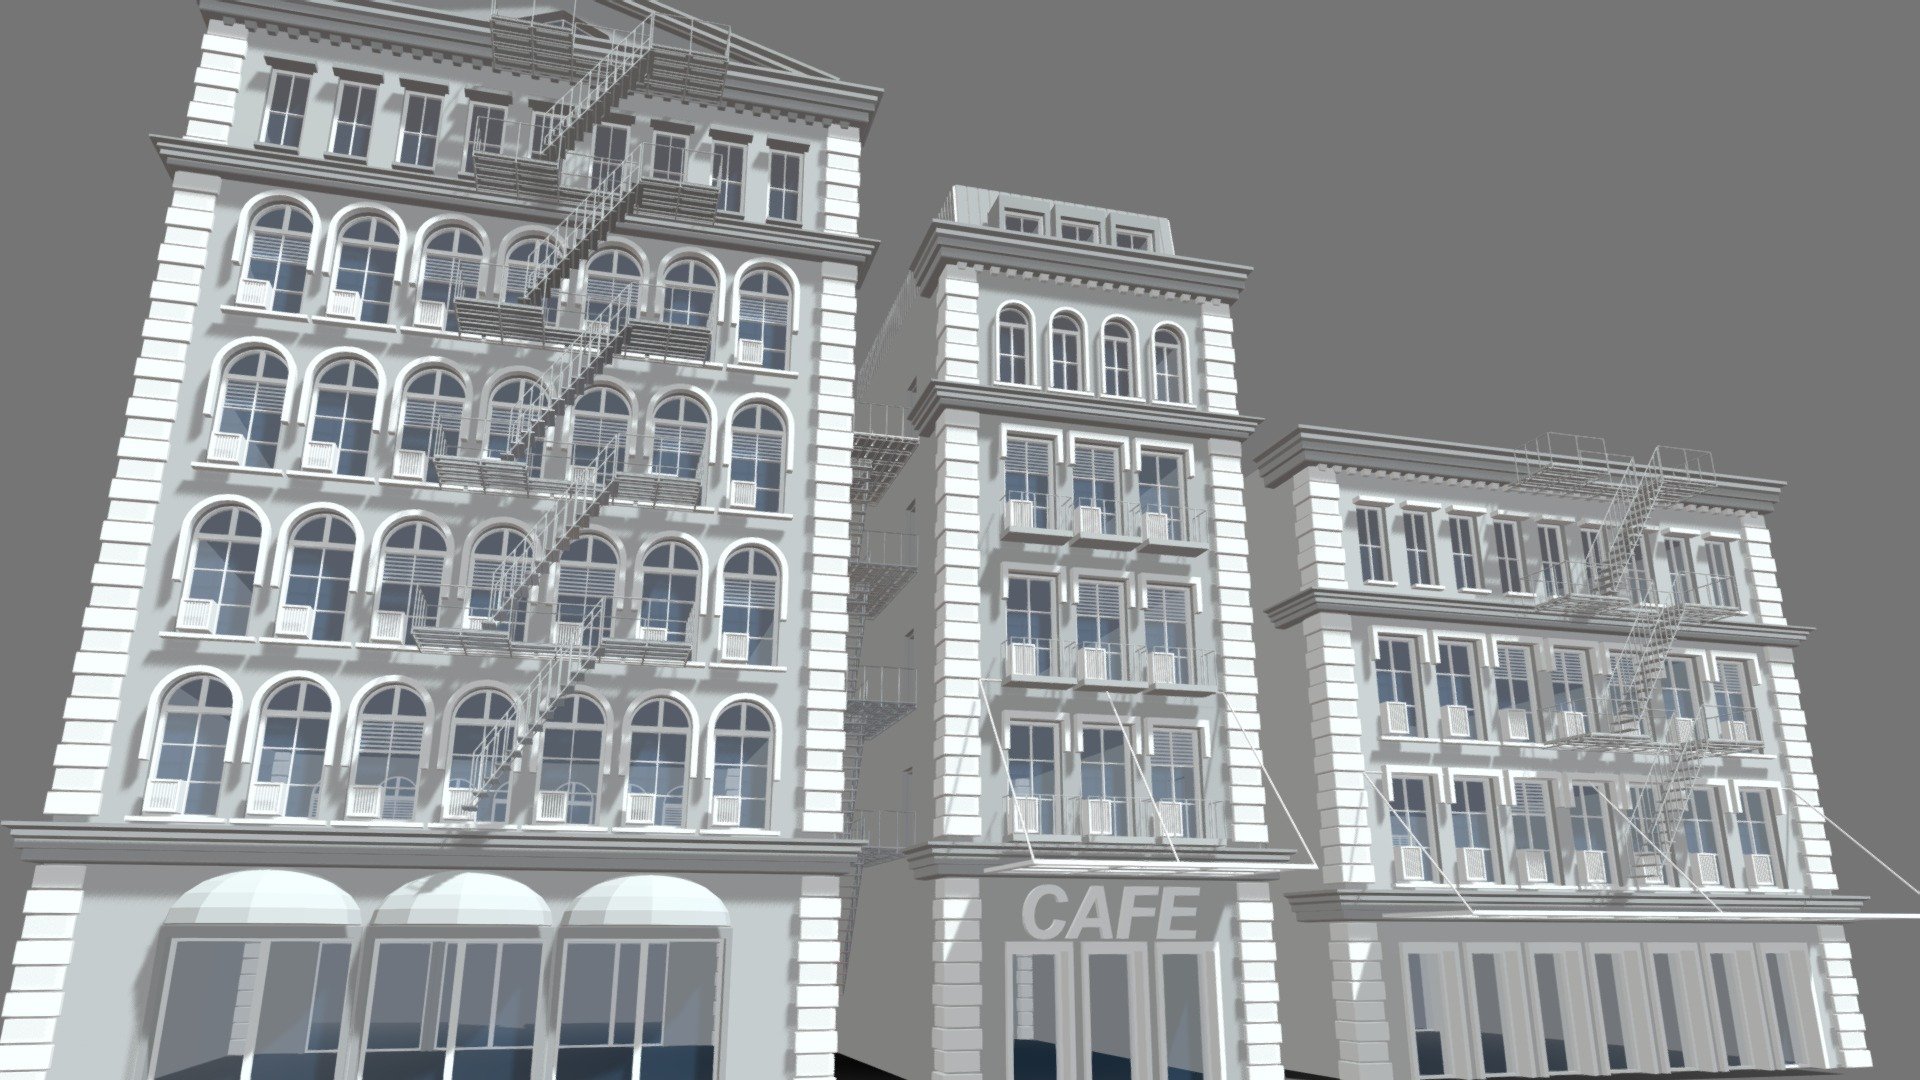 Detailed 3d model of 3 Tenement buildings.
Fully uvunwrapped and ready to render 3d model